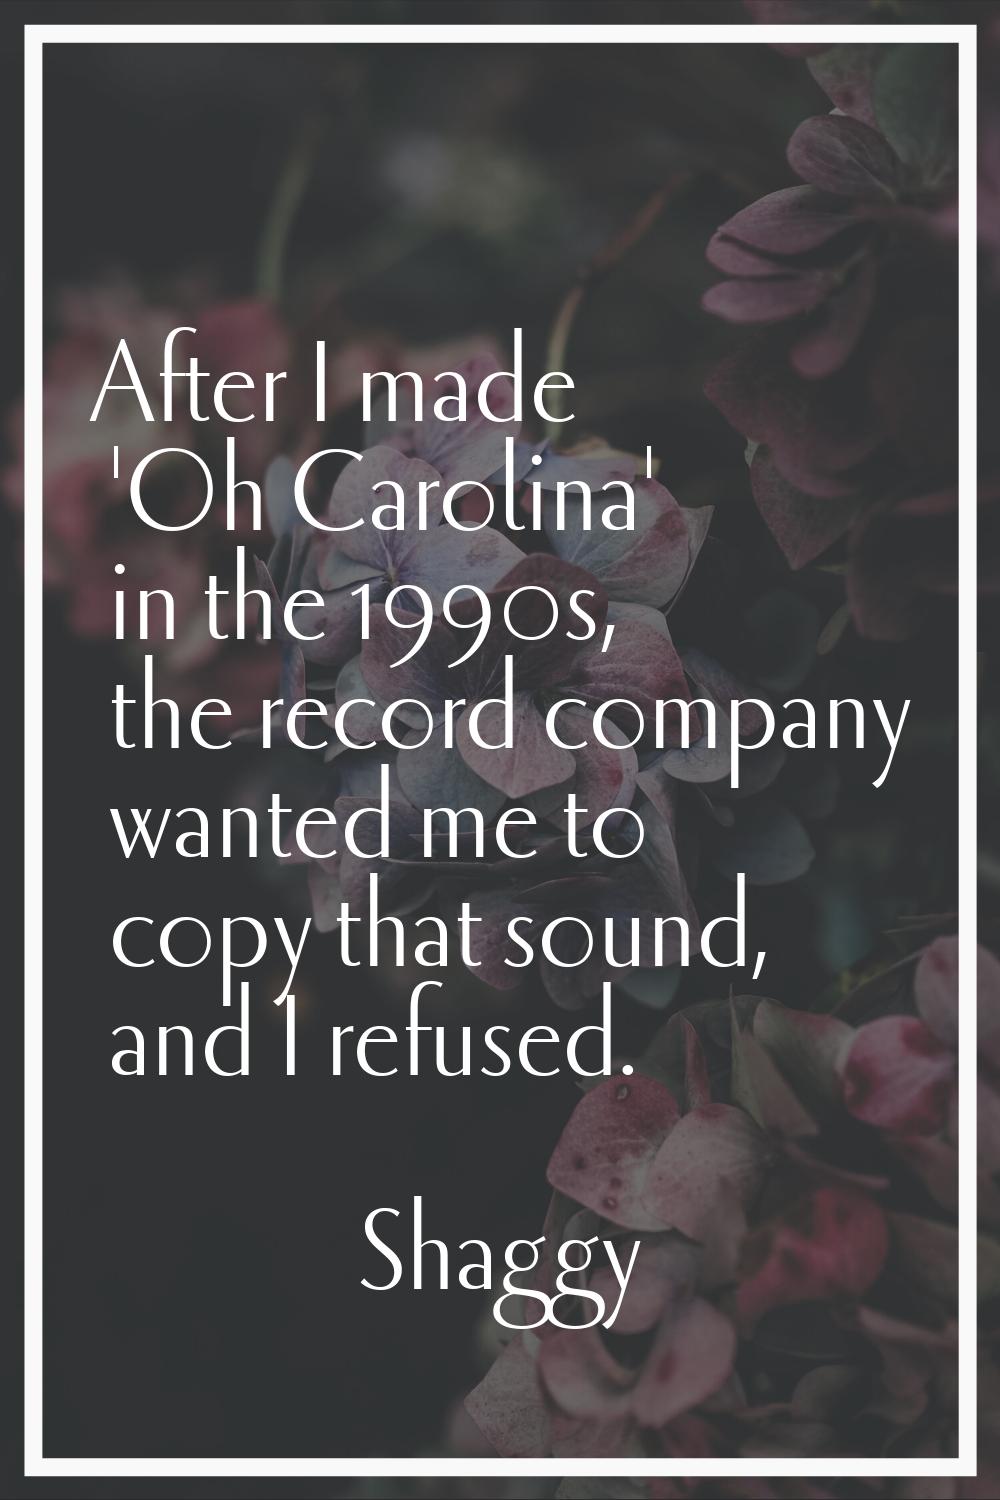 After I made 'Oh Carolina' in the 1990s, the record company wanted me to copy that sound, and I ref